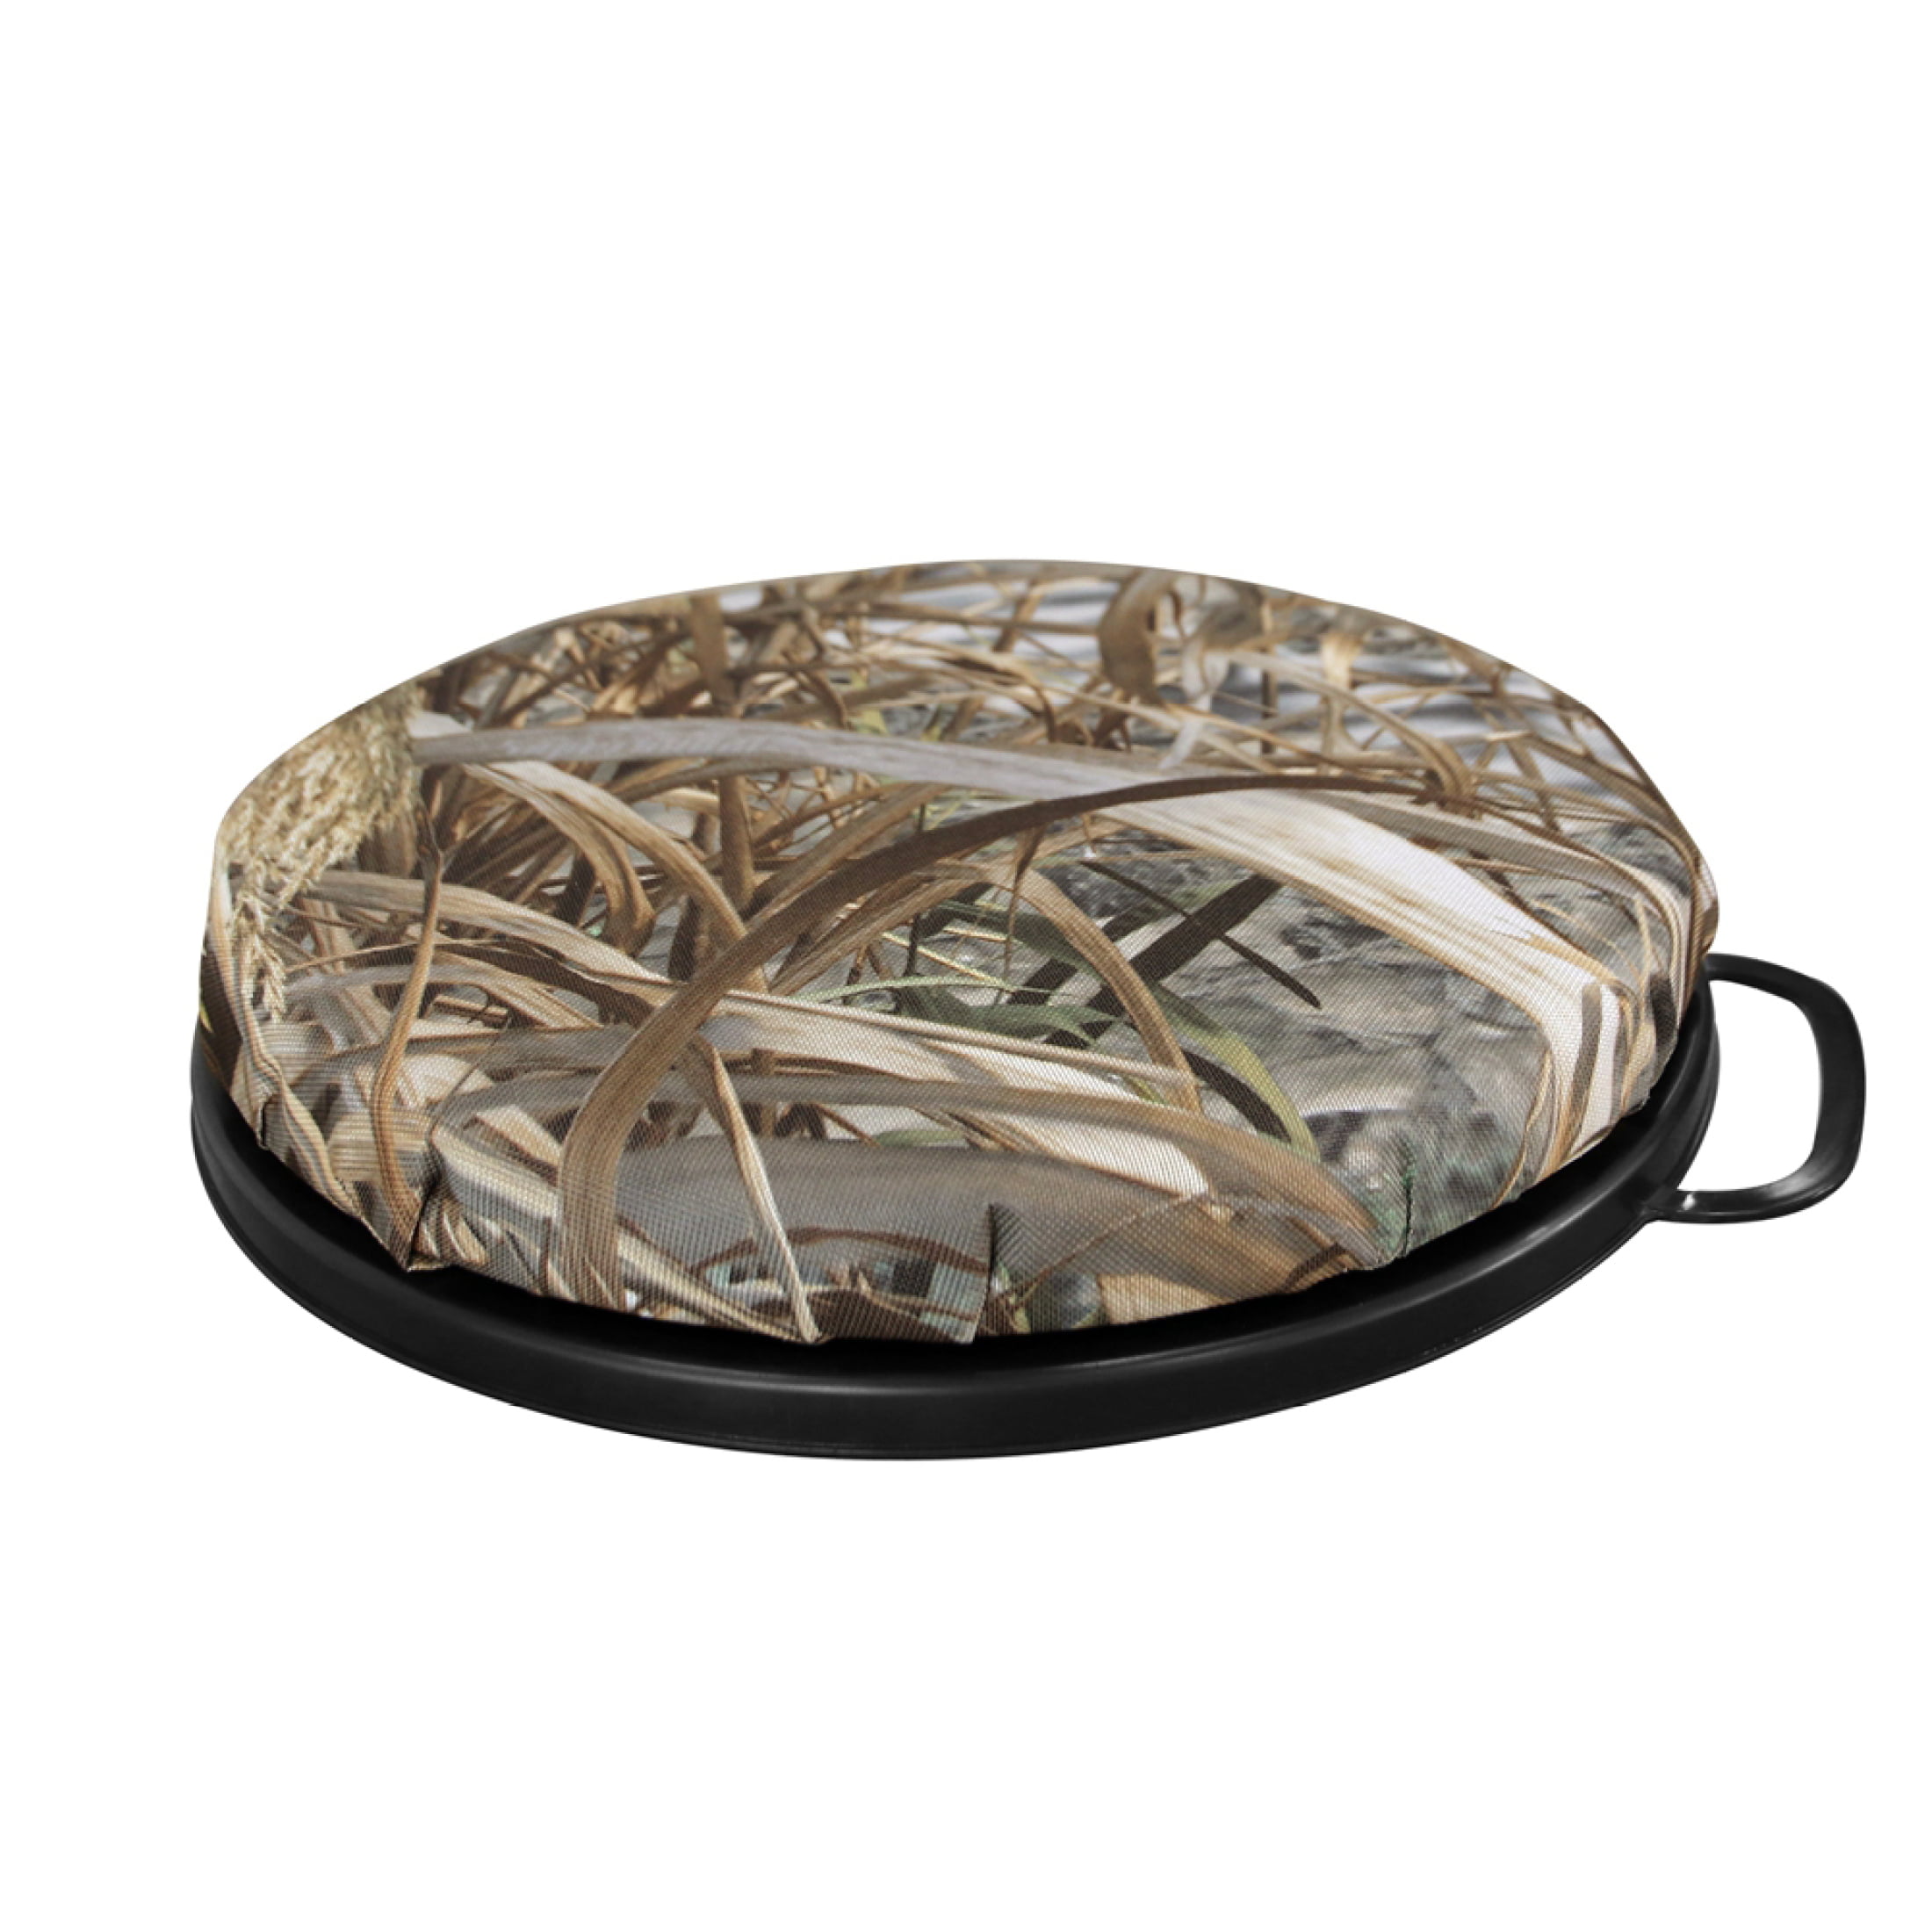  WarBull Bucket Seat 5 Gallon, 360-Degree Swivel Bucket Cushion,  Shadow Grass Camo Padded Bucket Lid, for Hunting, Ice Fishing, Gardening  and Camping, Quiet, Comfortable, Waterproof : Sports & Outdoors